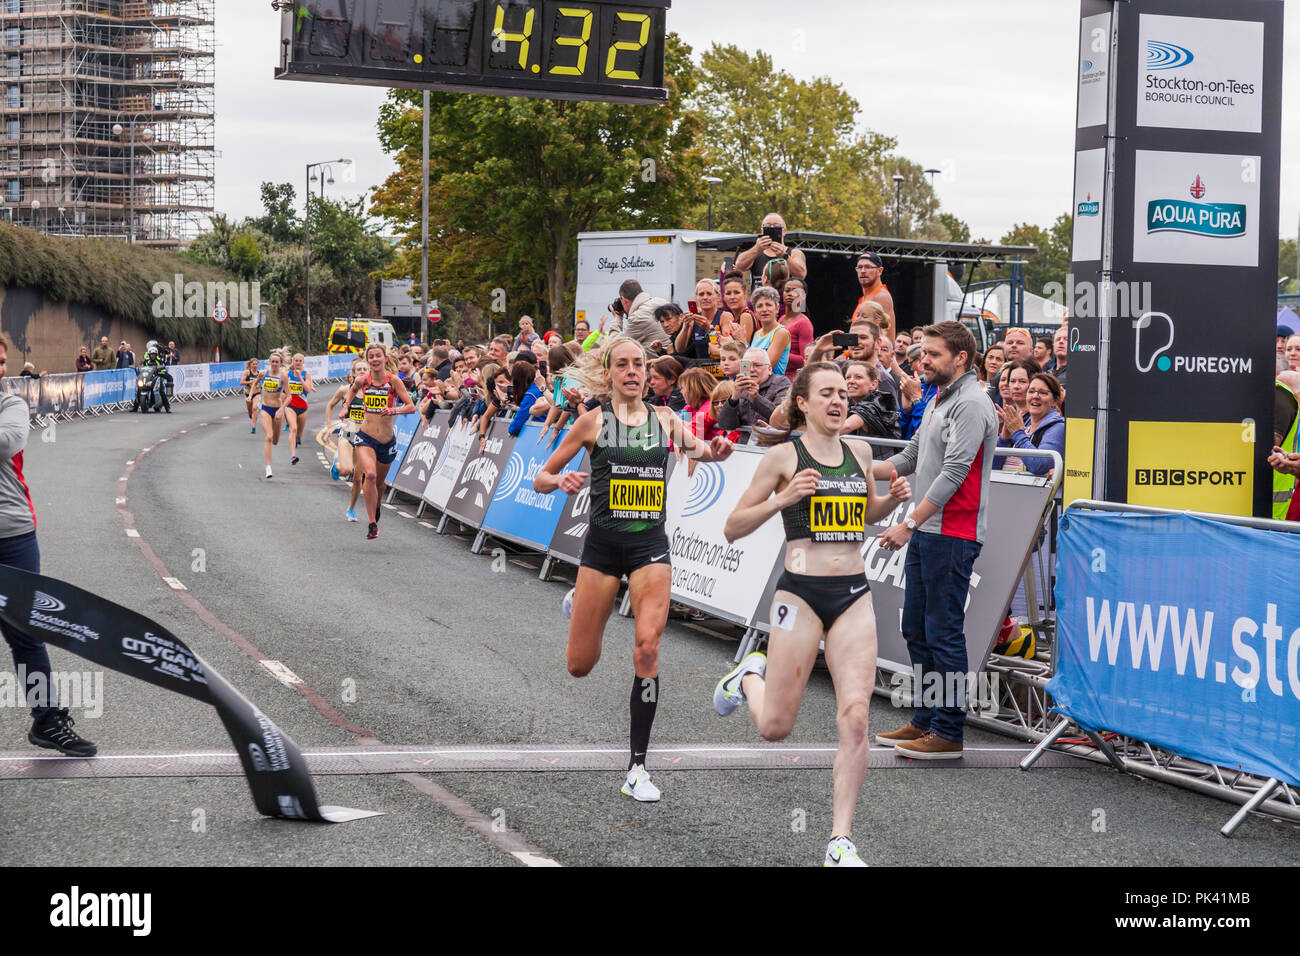 Laura Muir winning the Womens Elite Mile at the Great North City Games in Stockton on Tees,England,UK Stock Photo